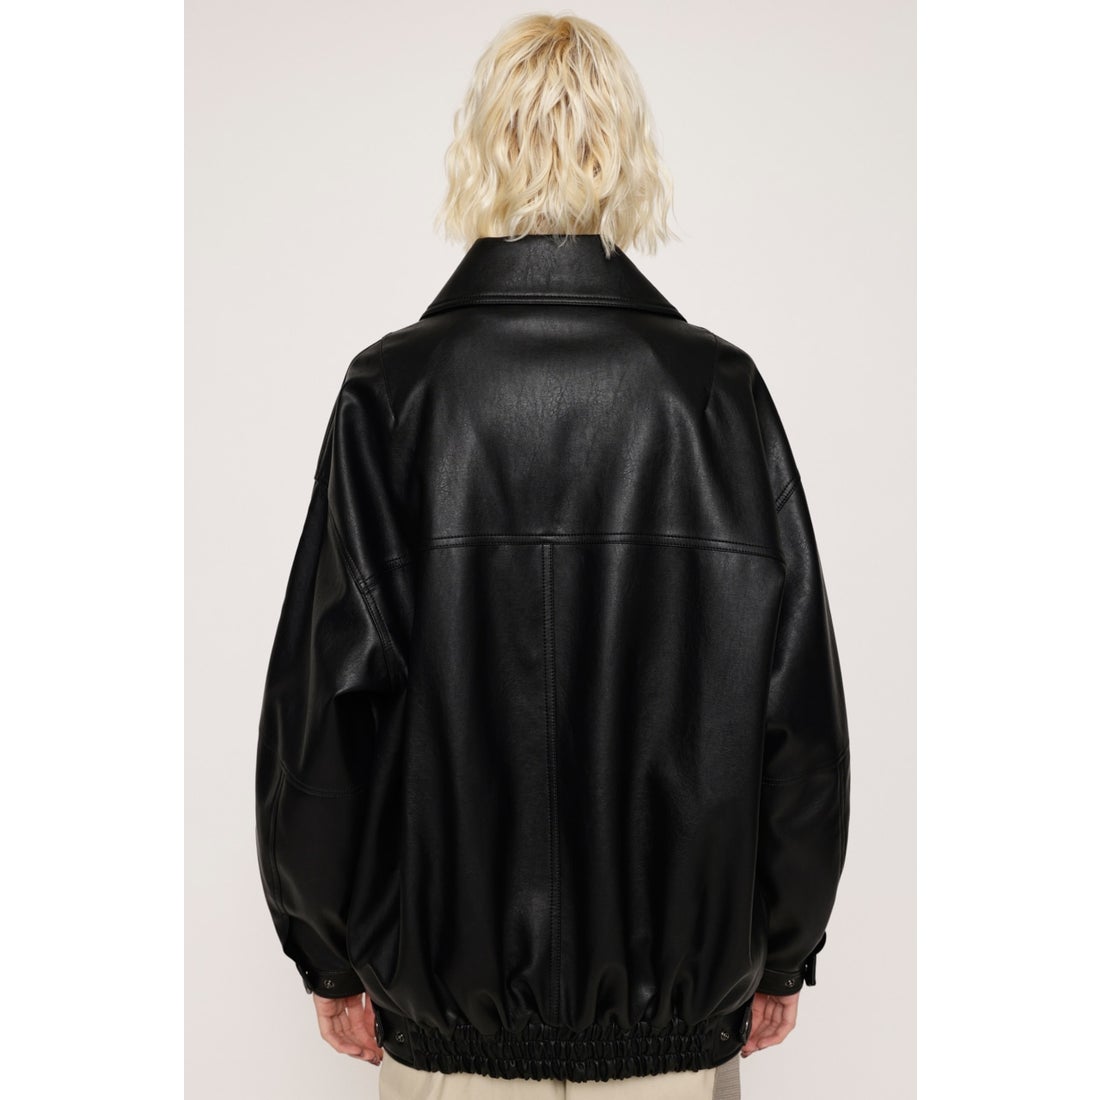 SLY FAUX LEATHER OVERSIZE ブルゾン BLK -ファッション通販 FASHION